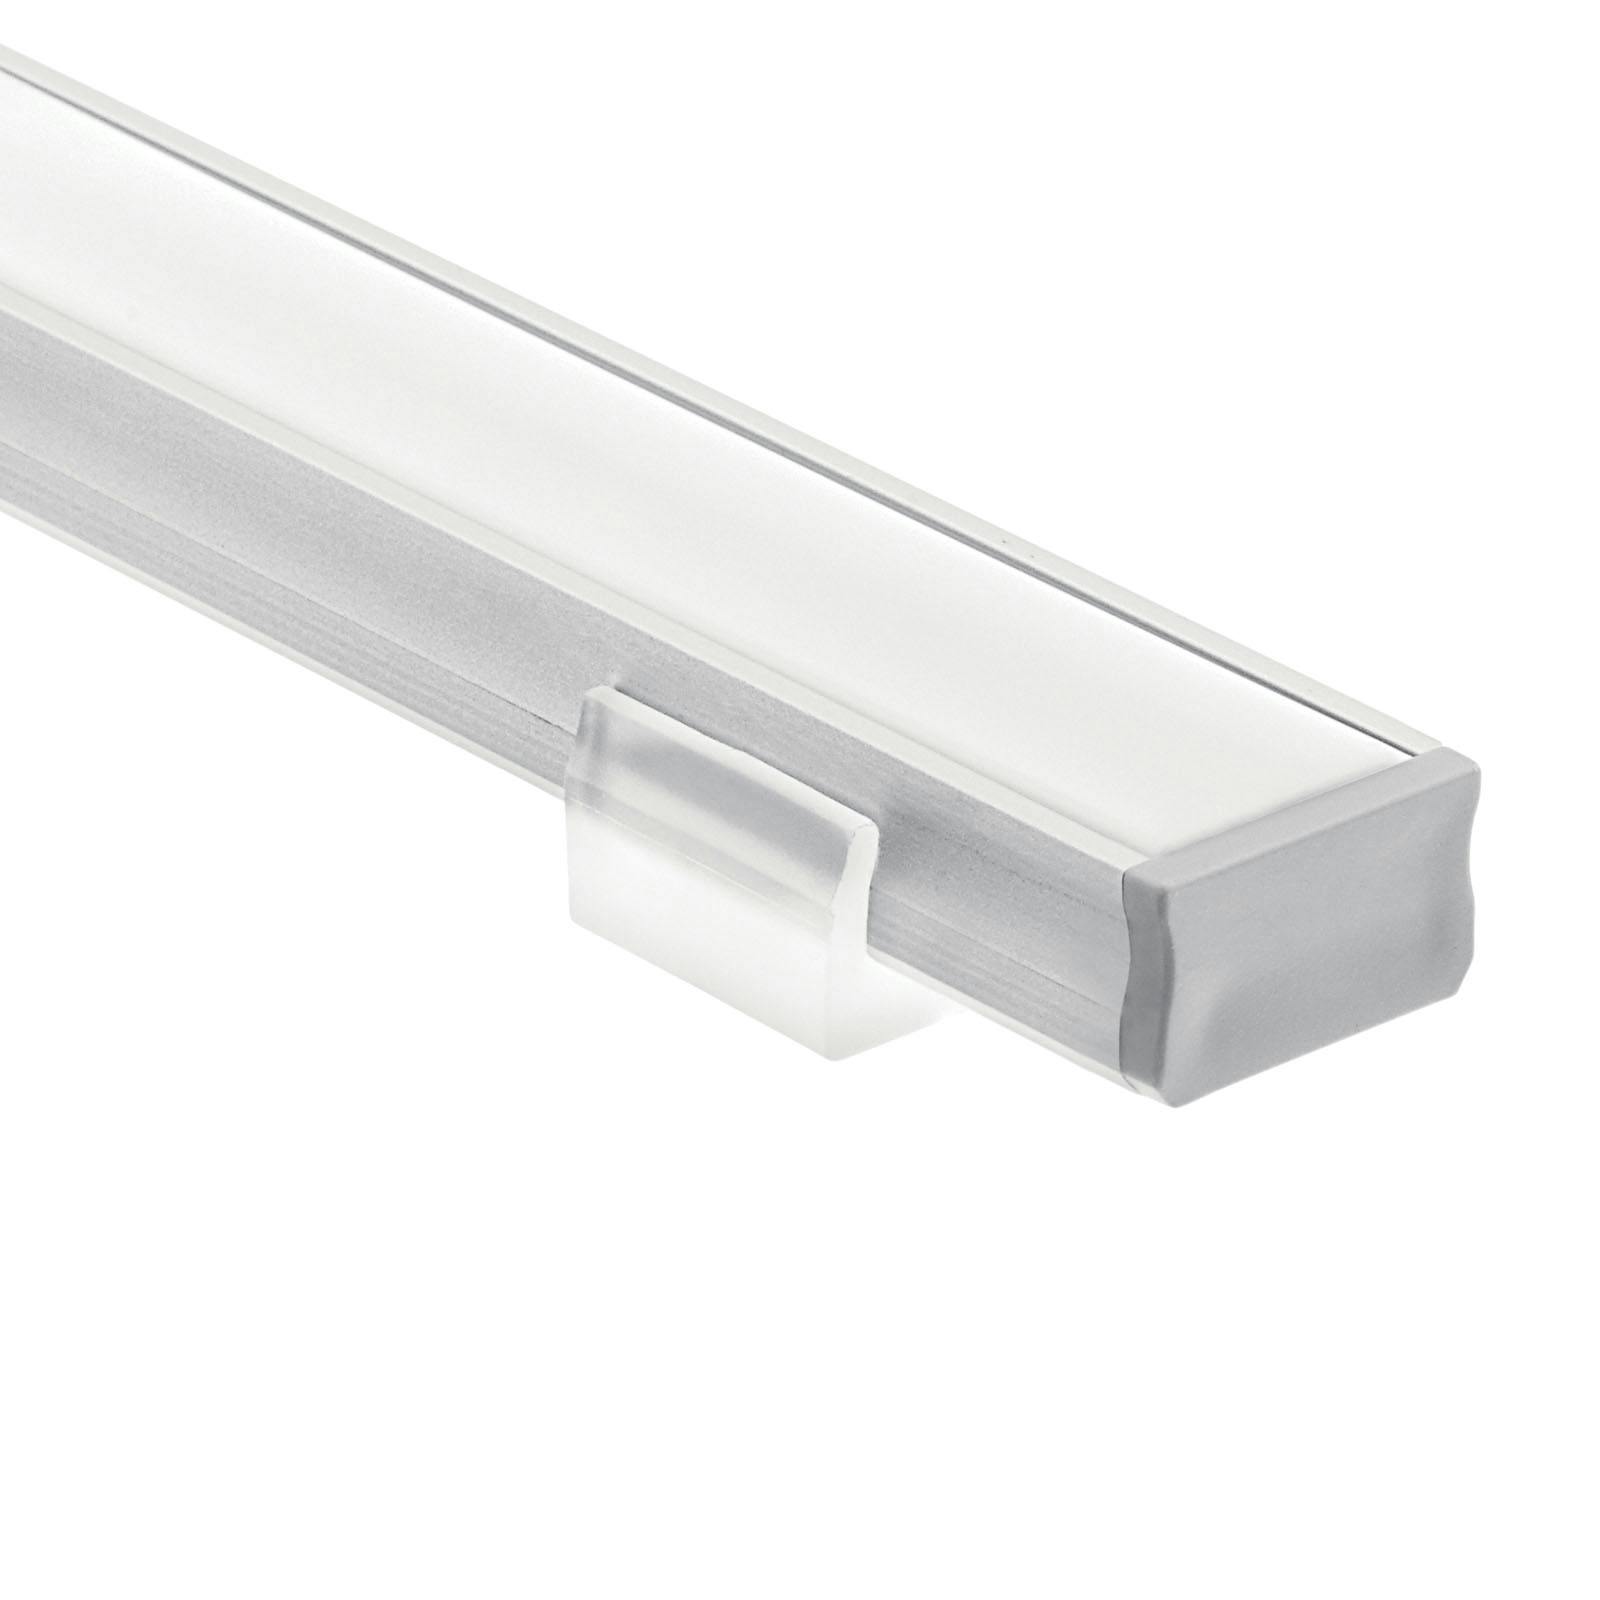 4' Standard Depth Surface Channel Silver on a white background